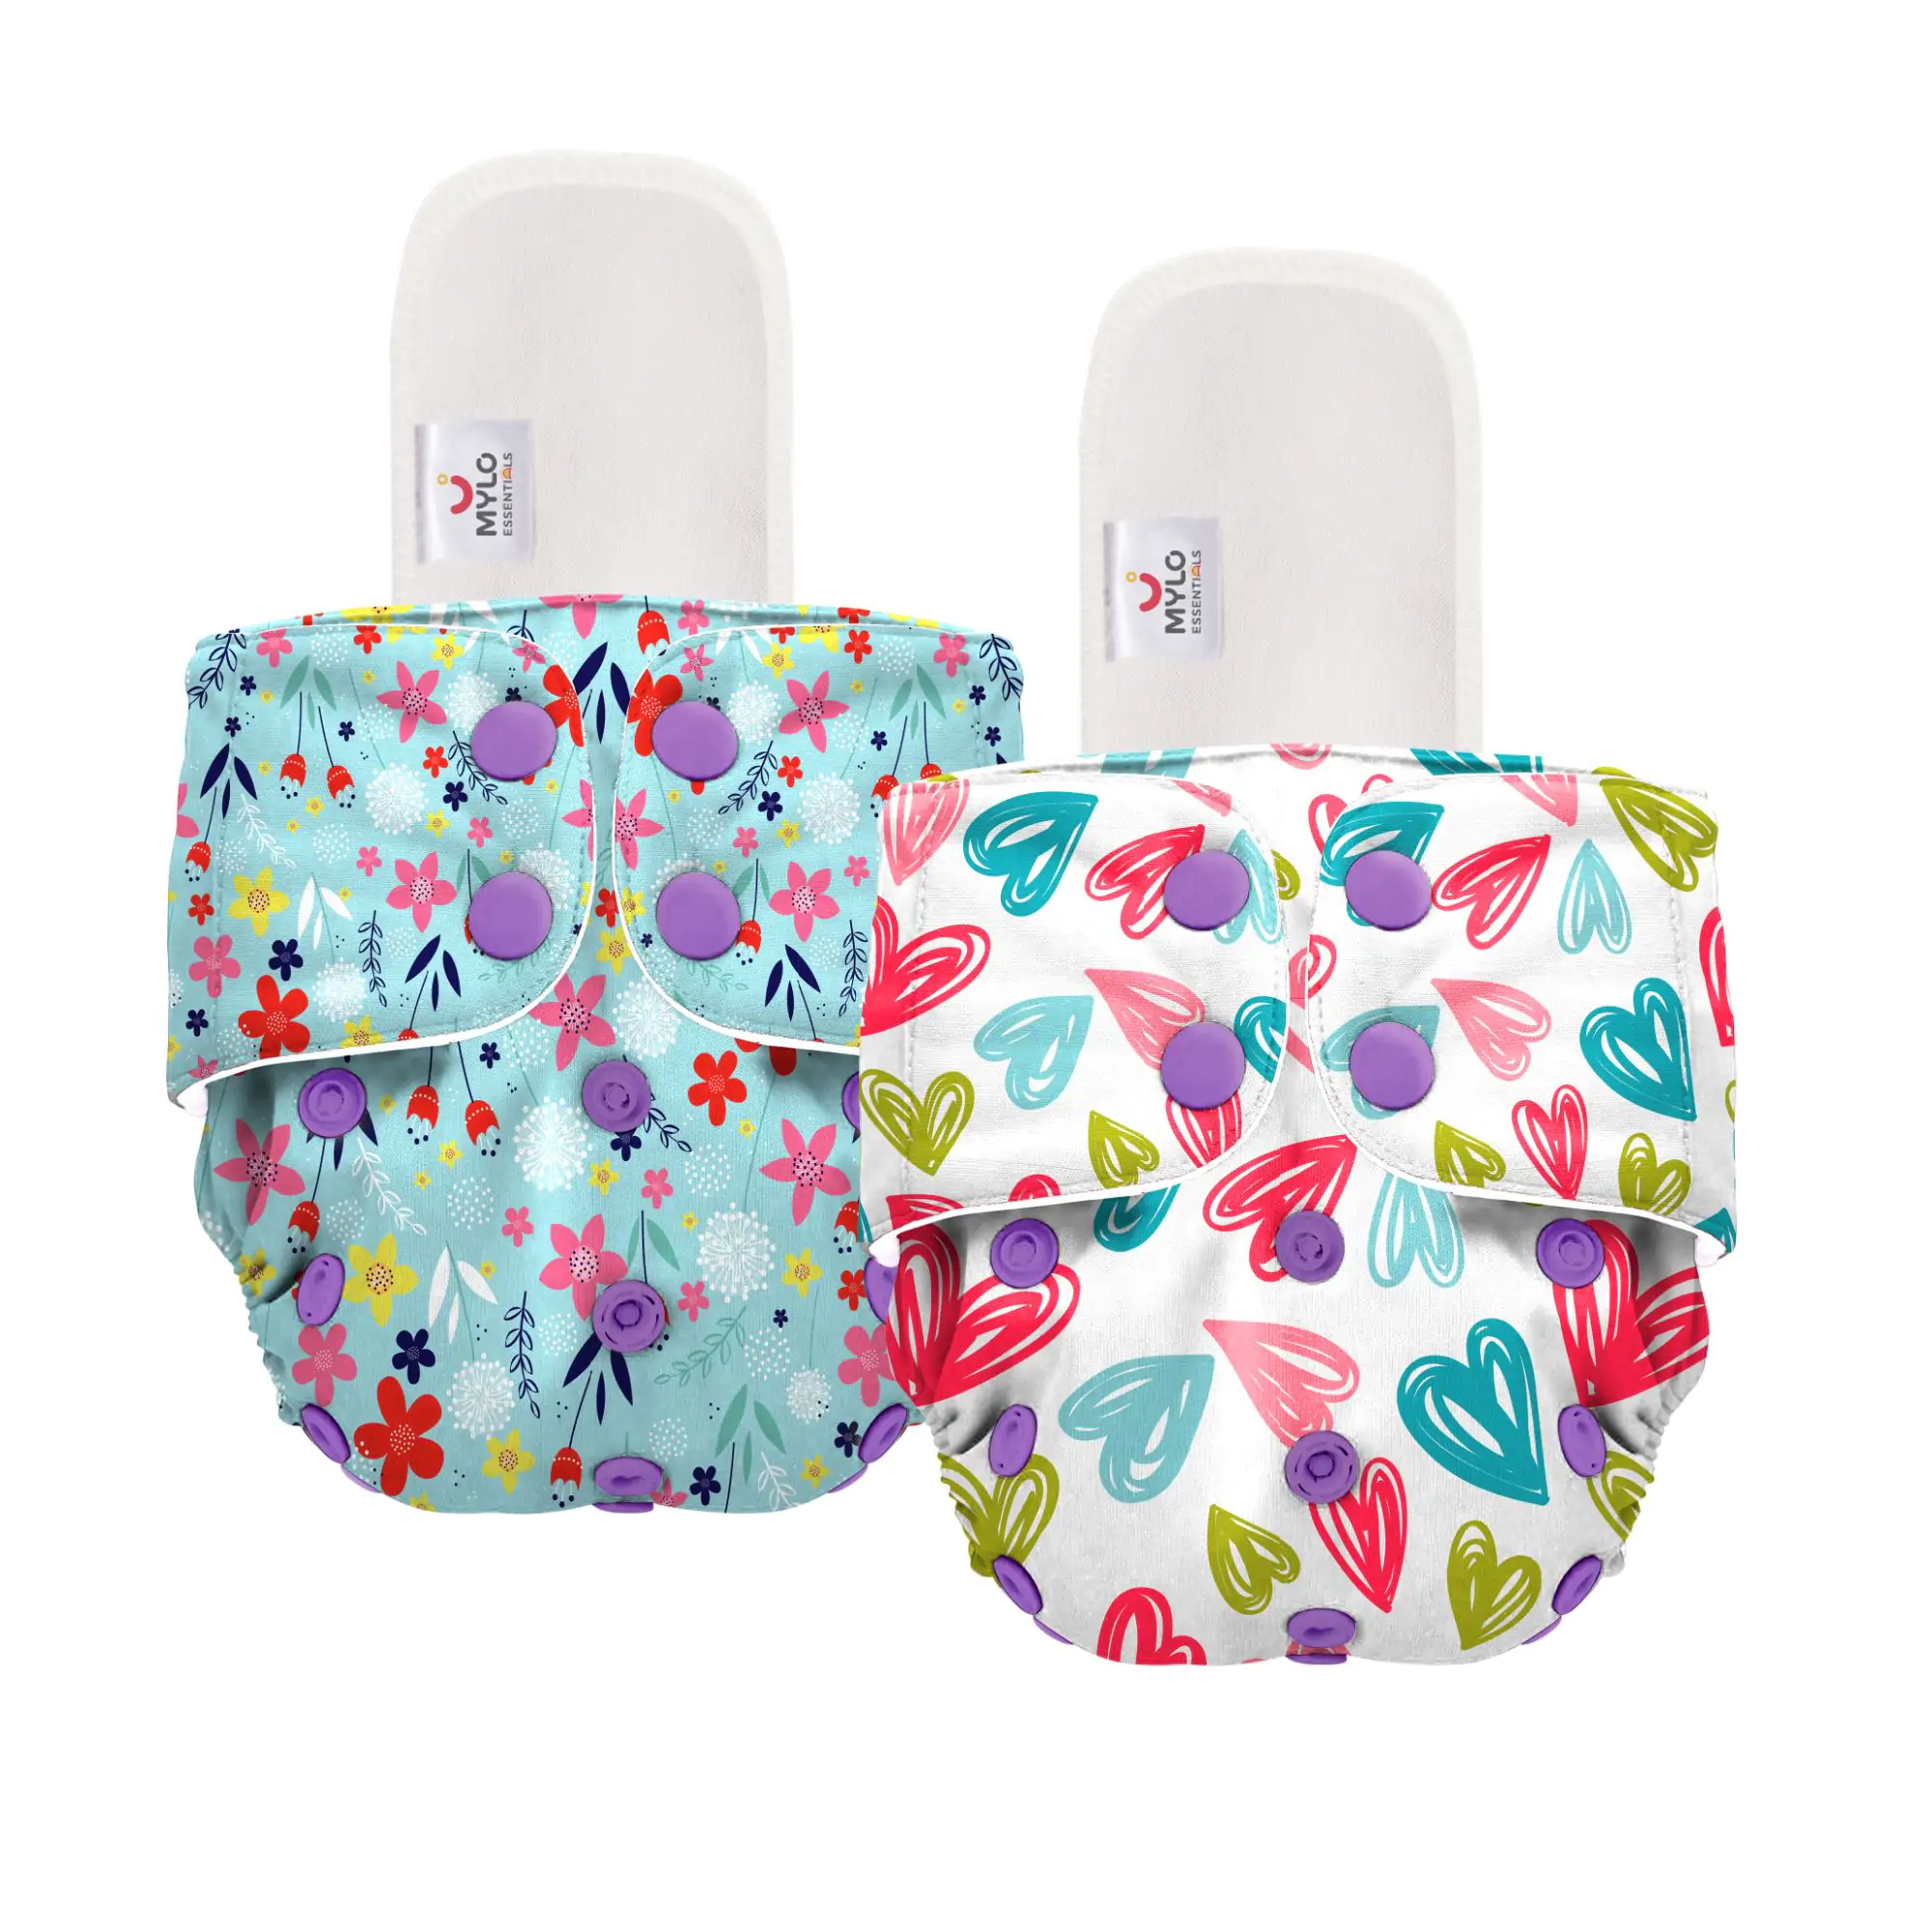 Mylo Adjustable Washable & Reusable Cloth Diaper With Dry Feel, Absorbent Insert Pad (3M-3Y) - Floral Spring & Heart Doodles - Pack of 2